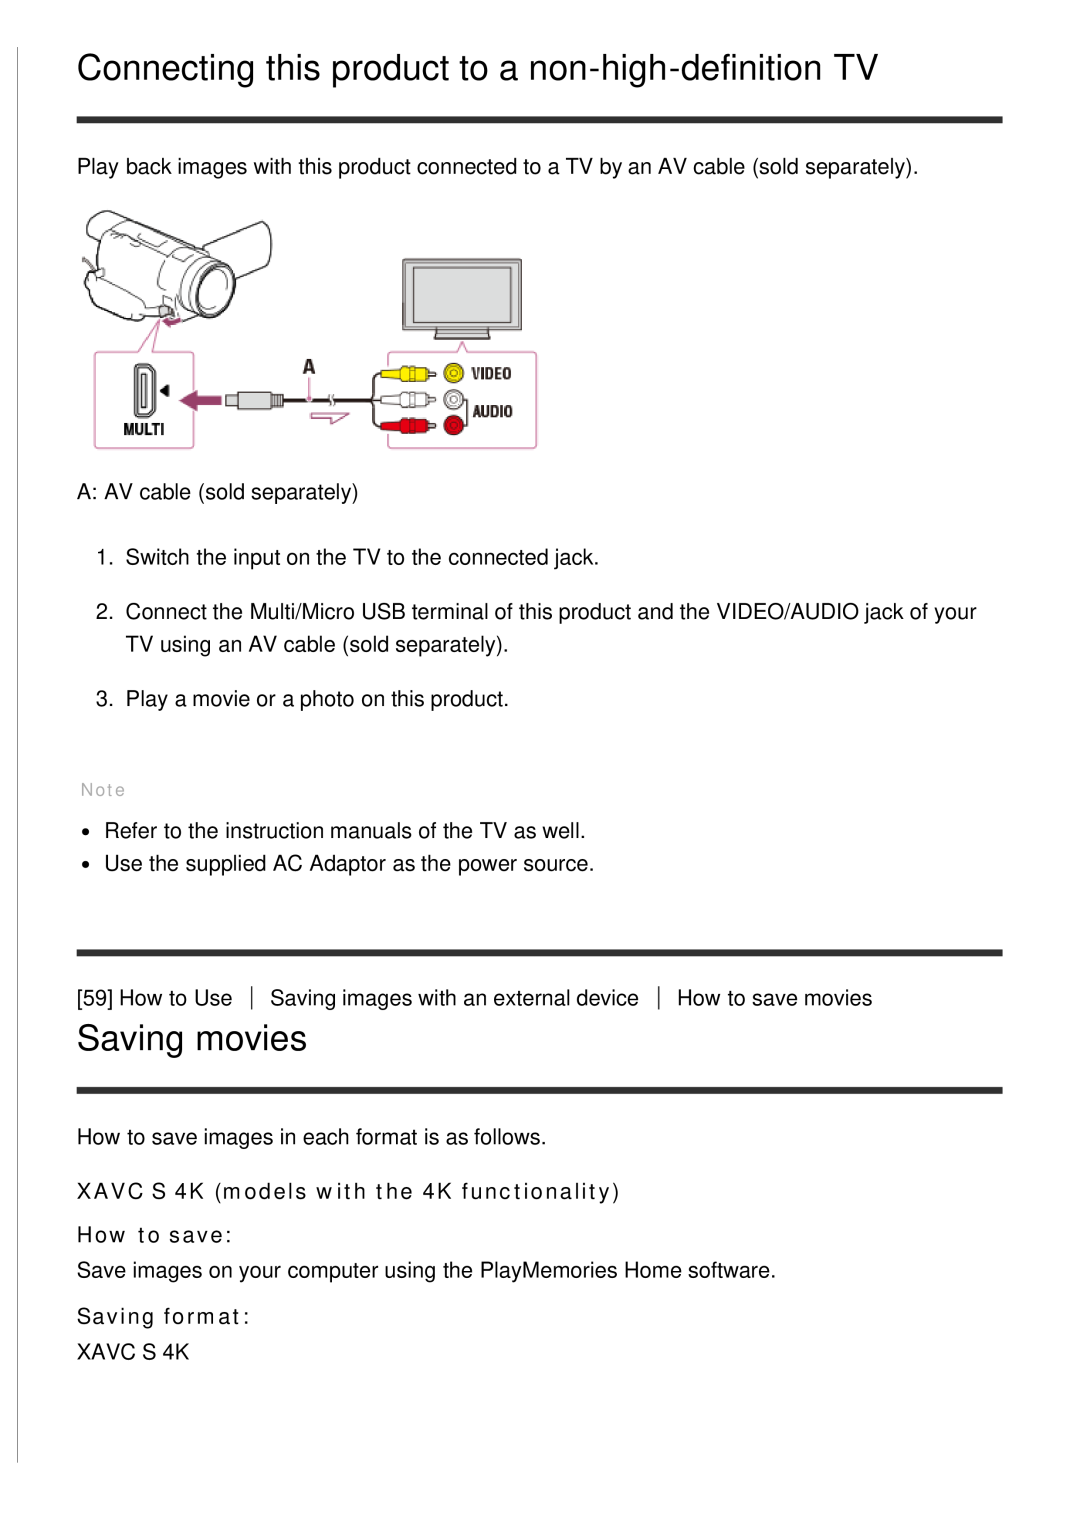 Sony HDR-CX900E, FDR-AX100E manual Connecting this product to a non-high-definition TV, Saving movies, Saving format 